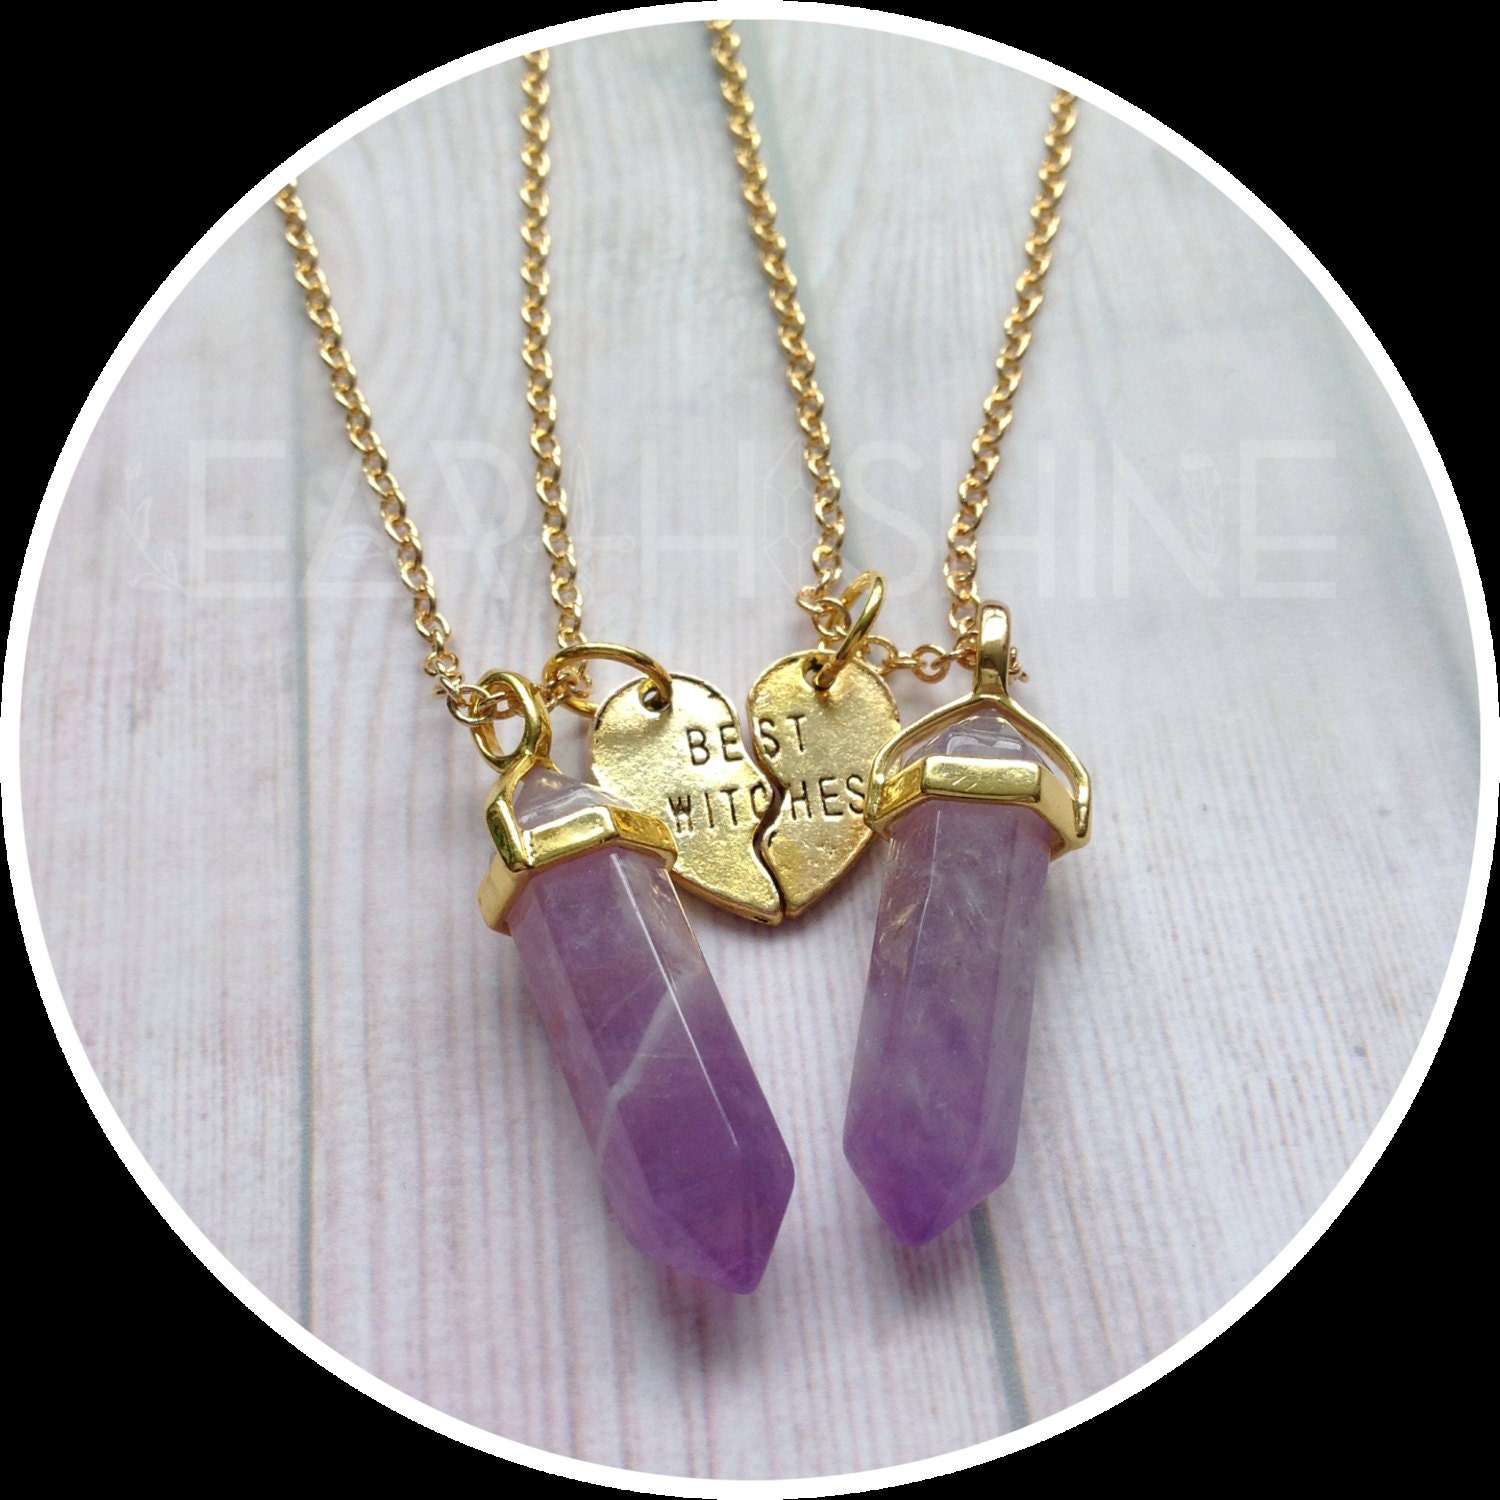 Best Witches Crystal necklaces YOUR CHOICE OF gemstone best